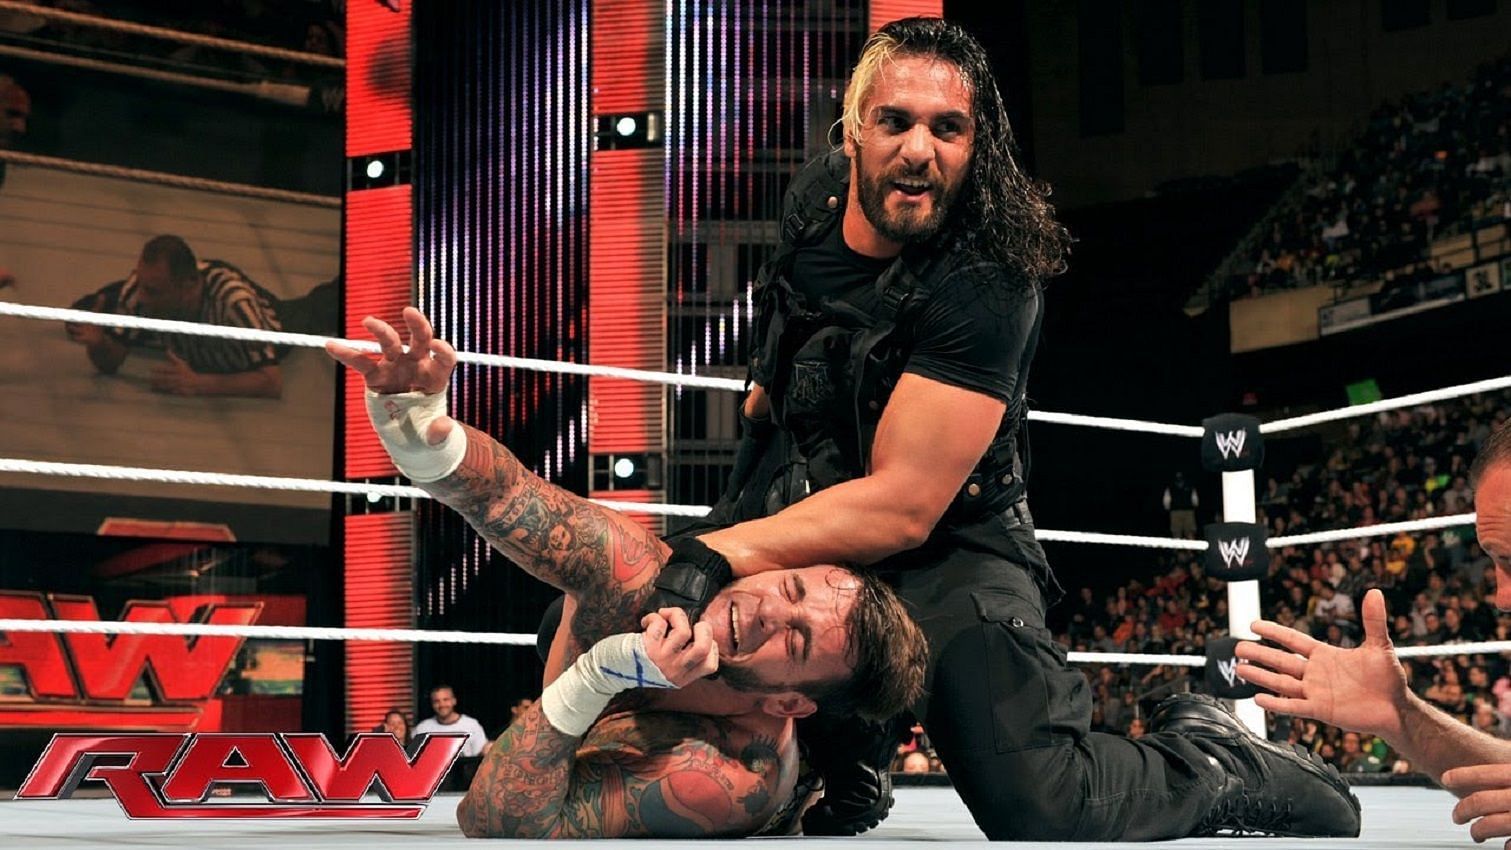 Seth Rollins had a match with CM Punk once, but that was just on RAW.